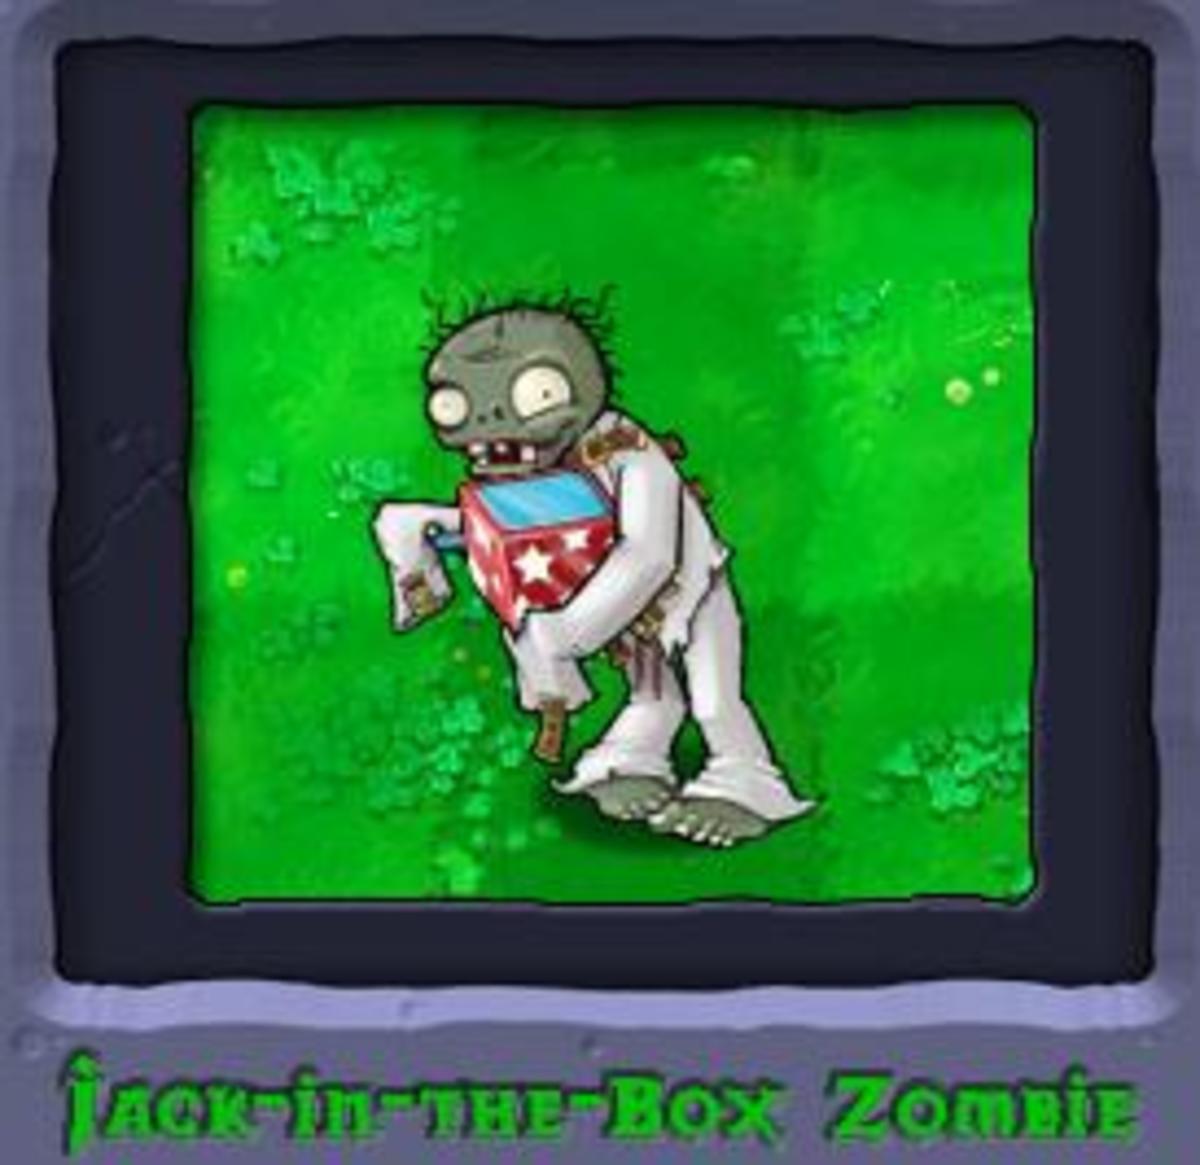 Jack-In-The-Box Zombie